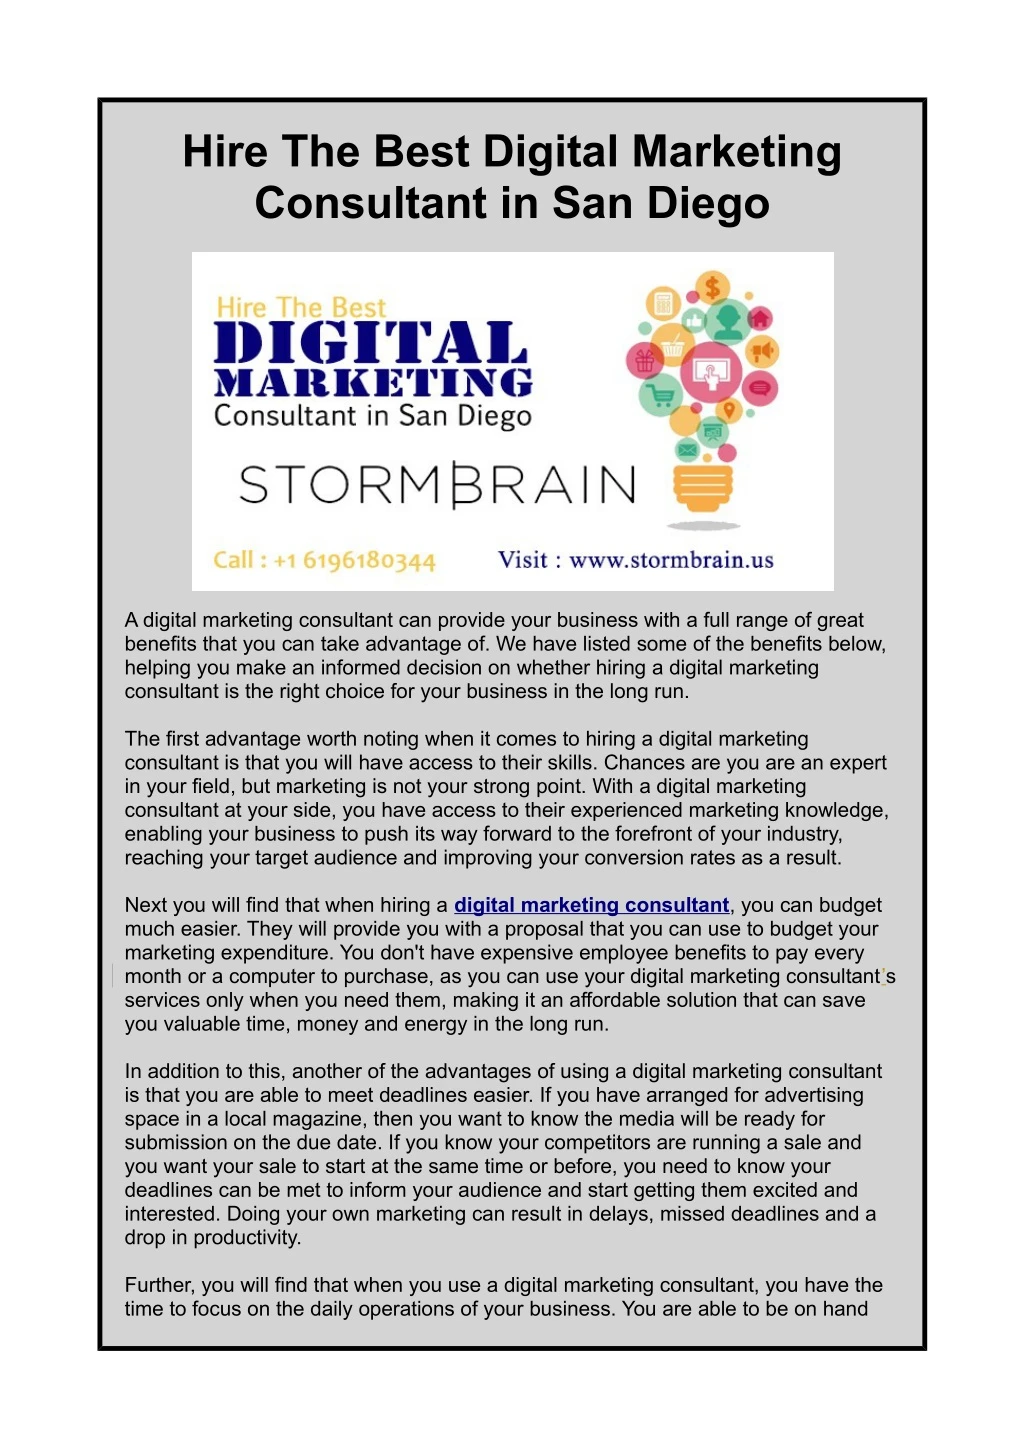 hire the best digital marketing consultant